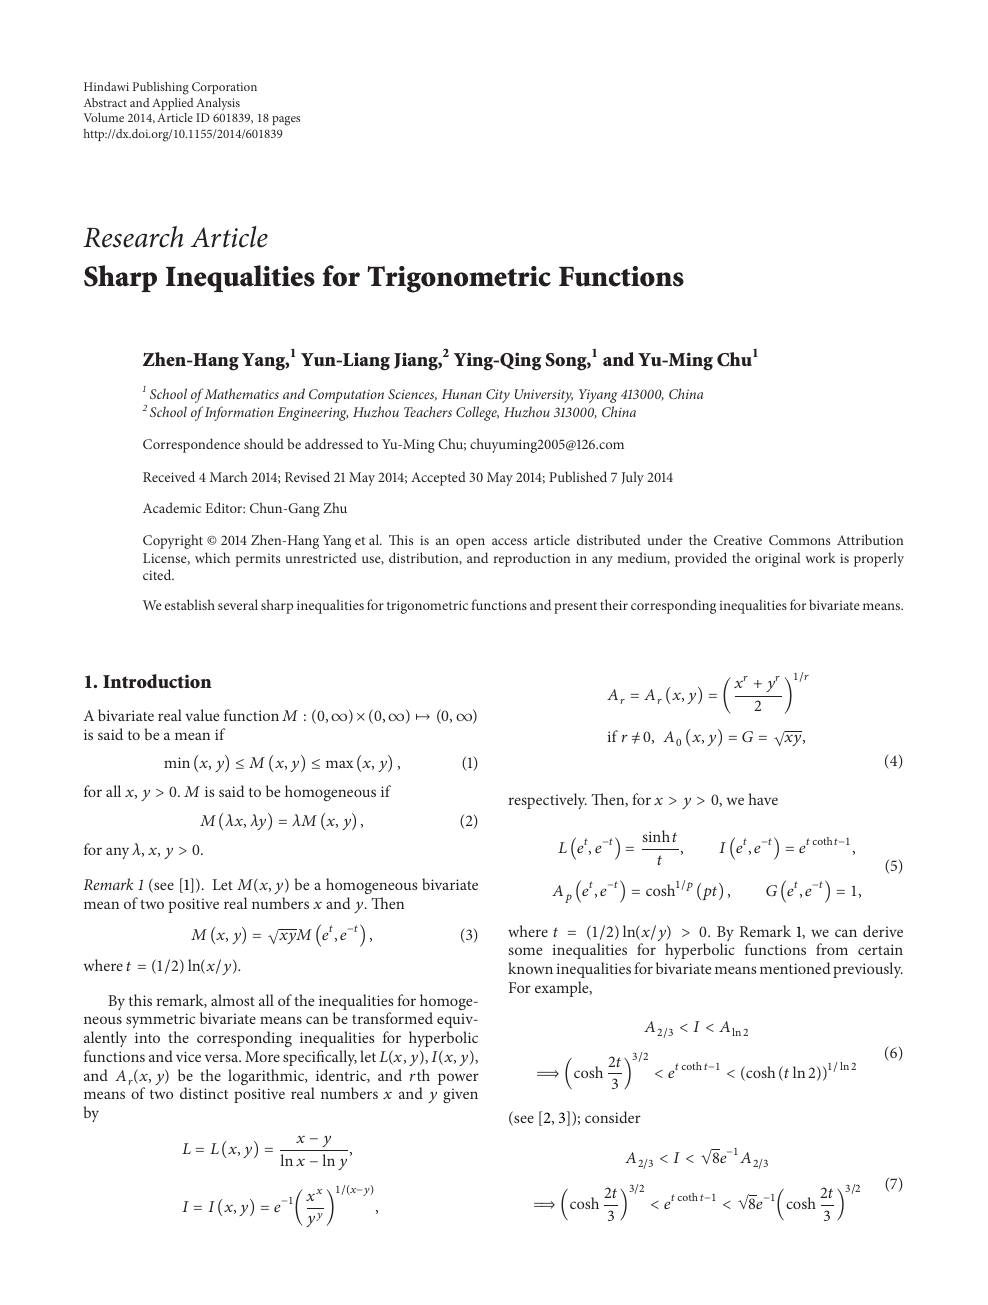 Sharp Inequalities For Trigonometric Functions Topic Of Research Paper In Mathematics Download Scholarly Article Pdf And Read For Free On Cyberleninka Open Science Hub